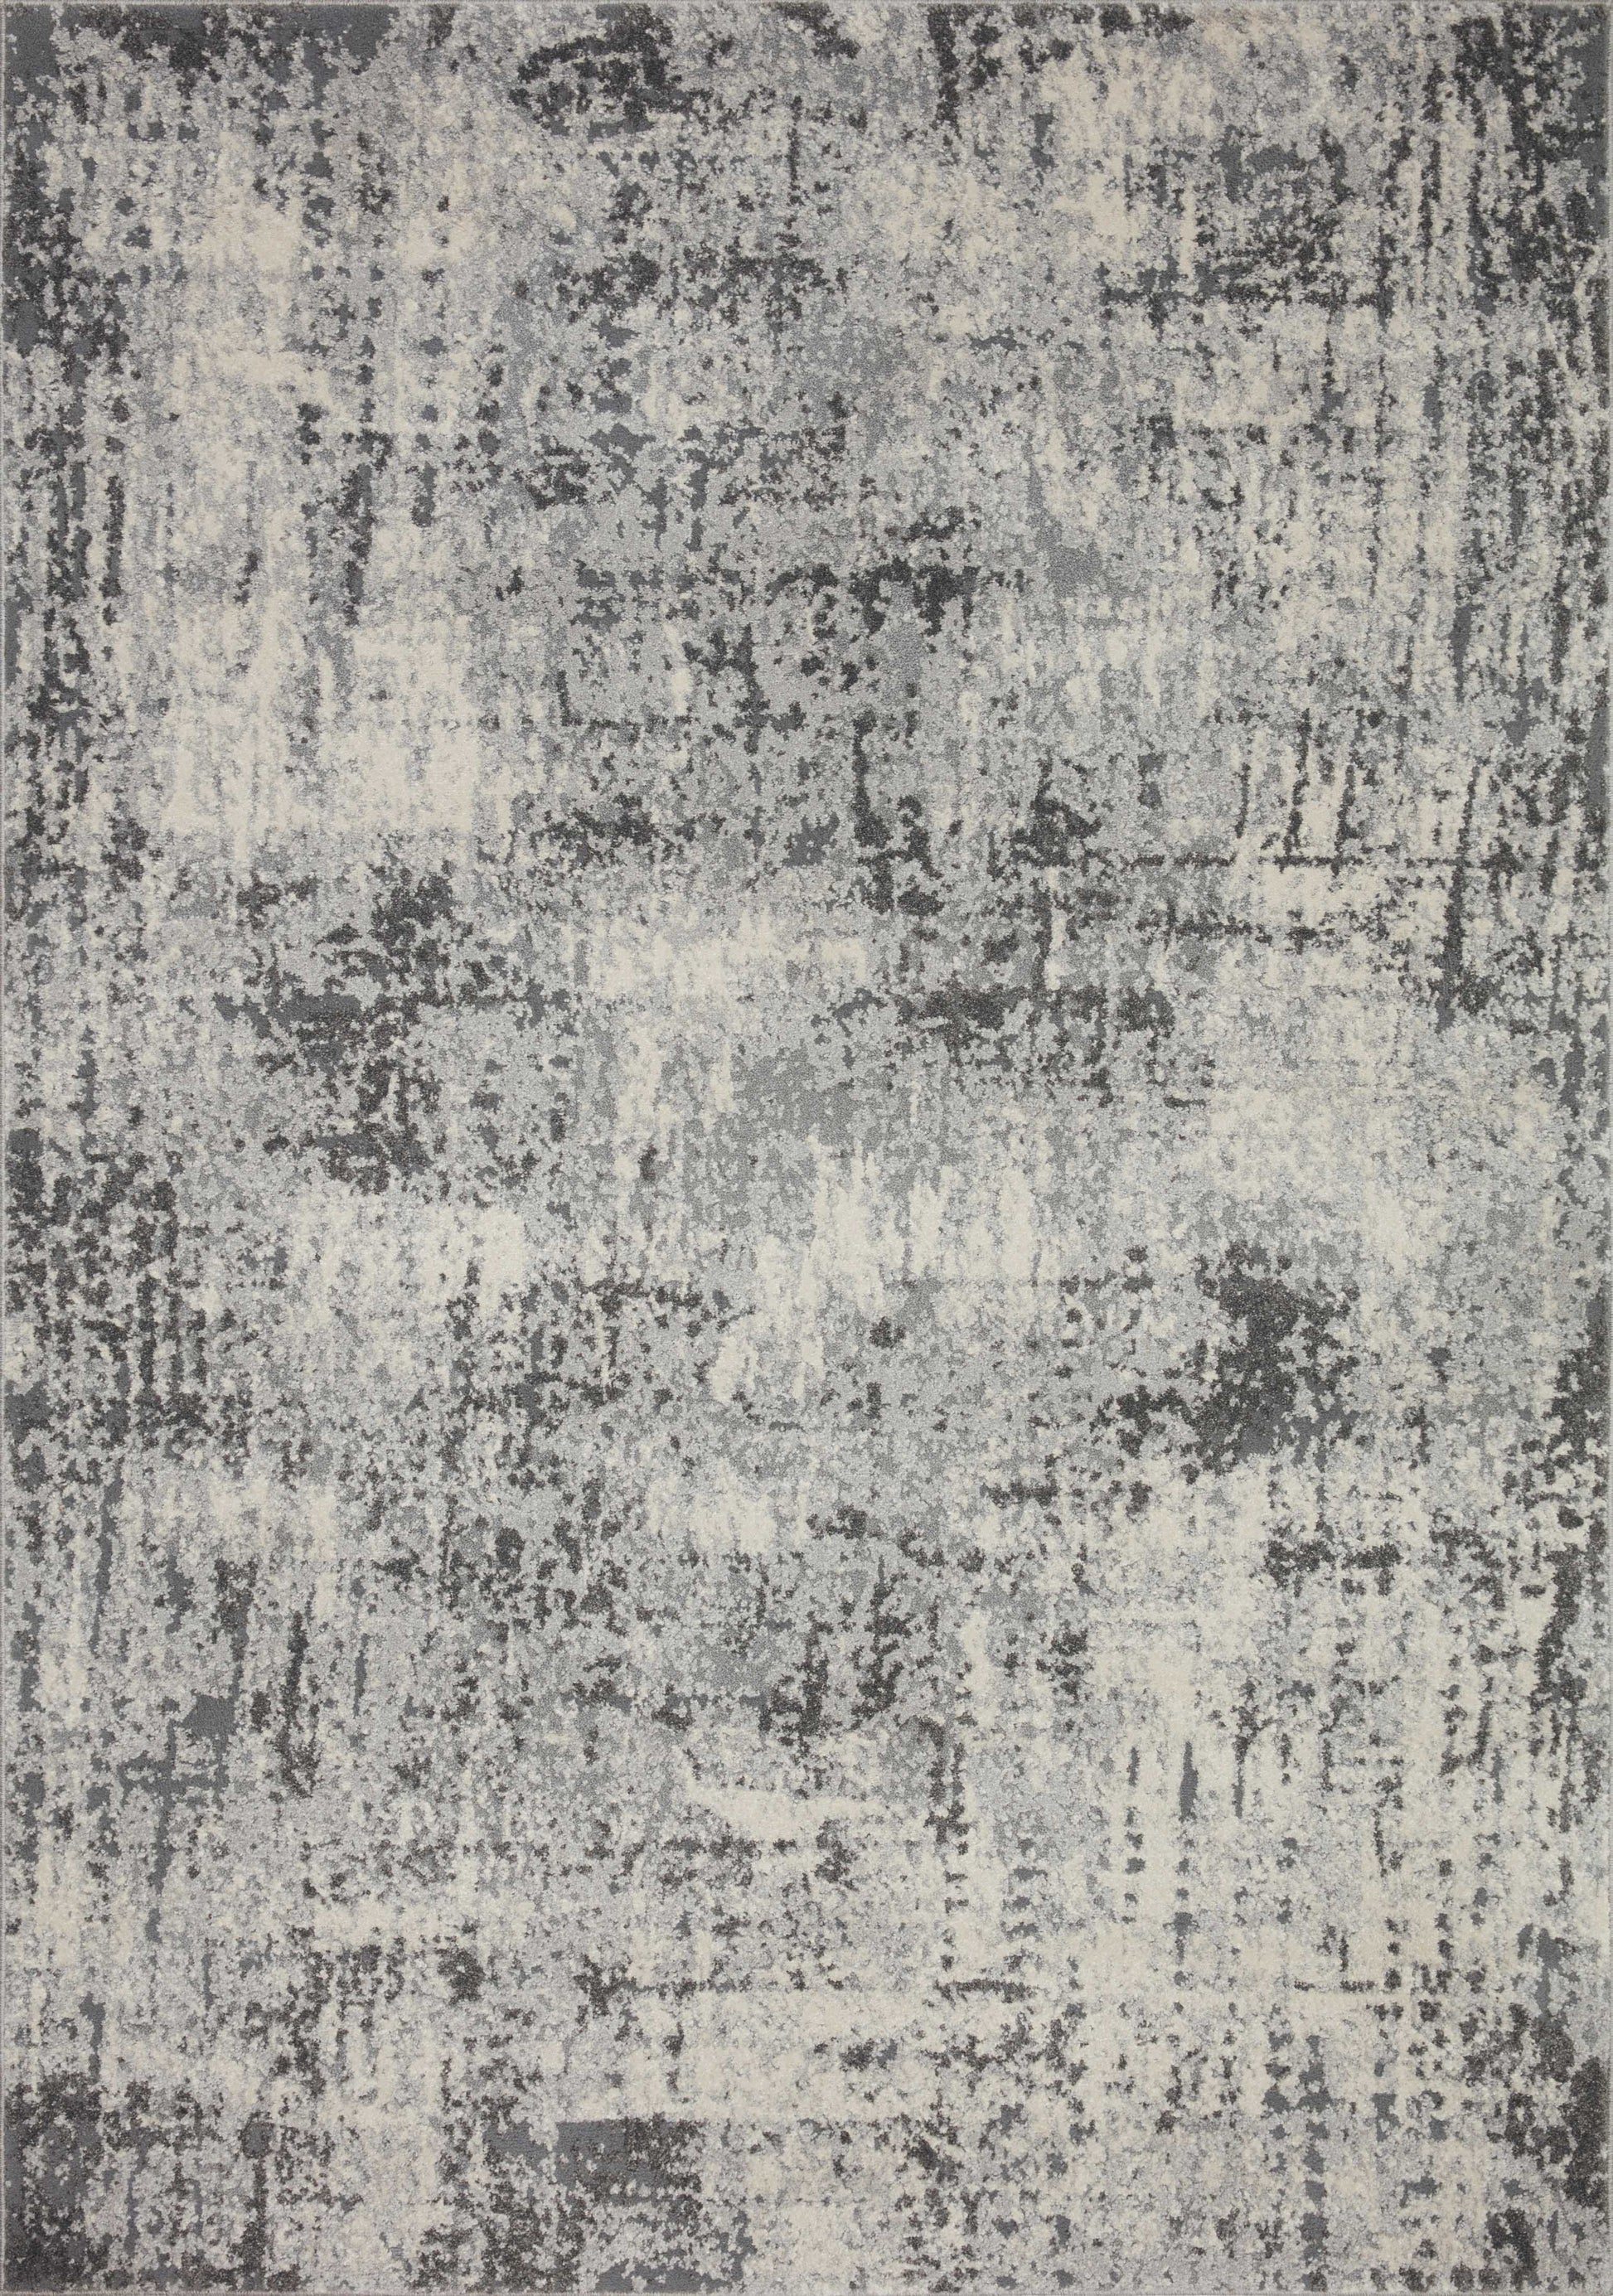 A picture of Loloi's Austen rug, in style AUS-01, color Pebble / Charcoal